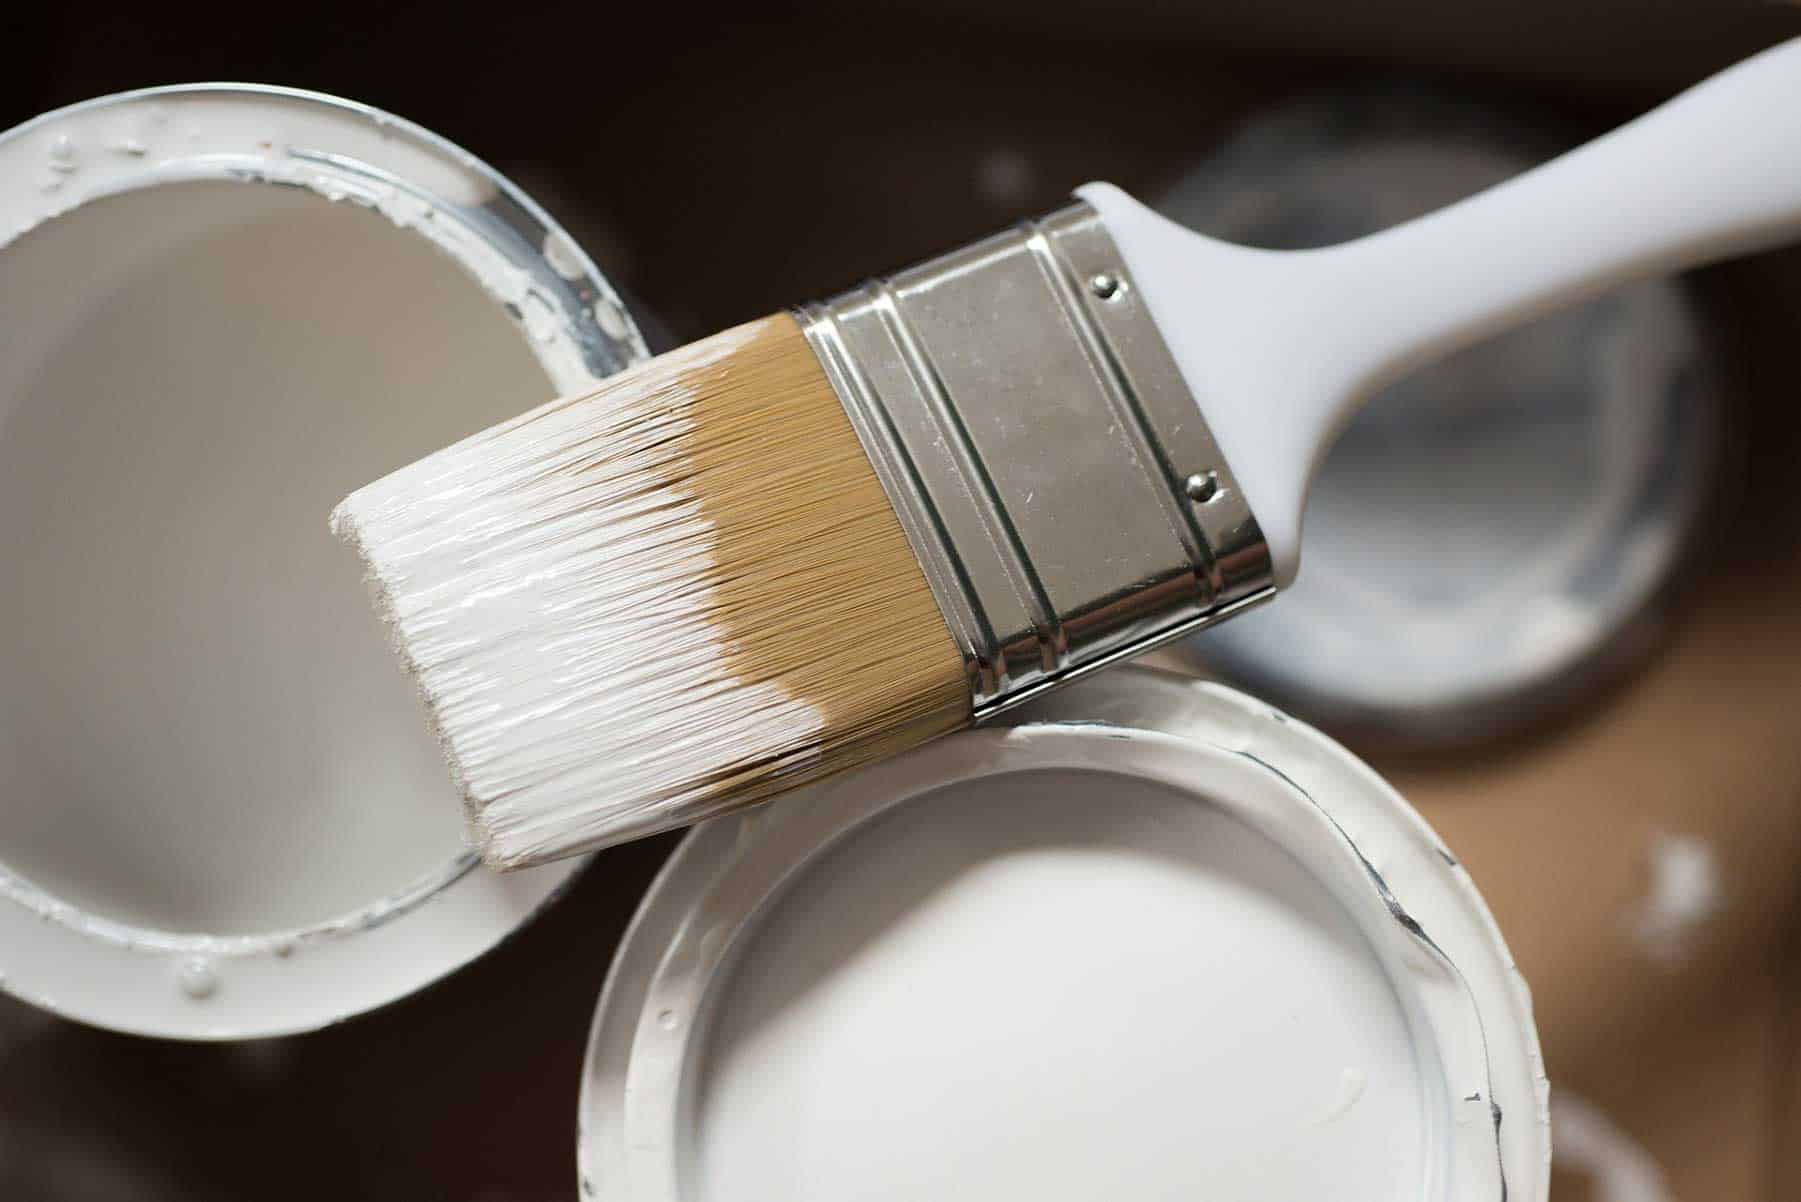 How to Start a Painting Business - Brushes